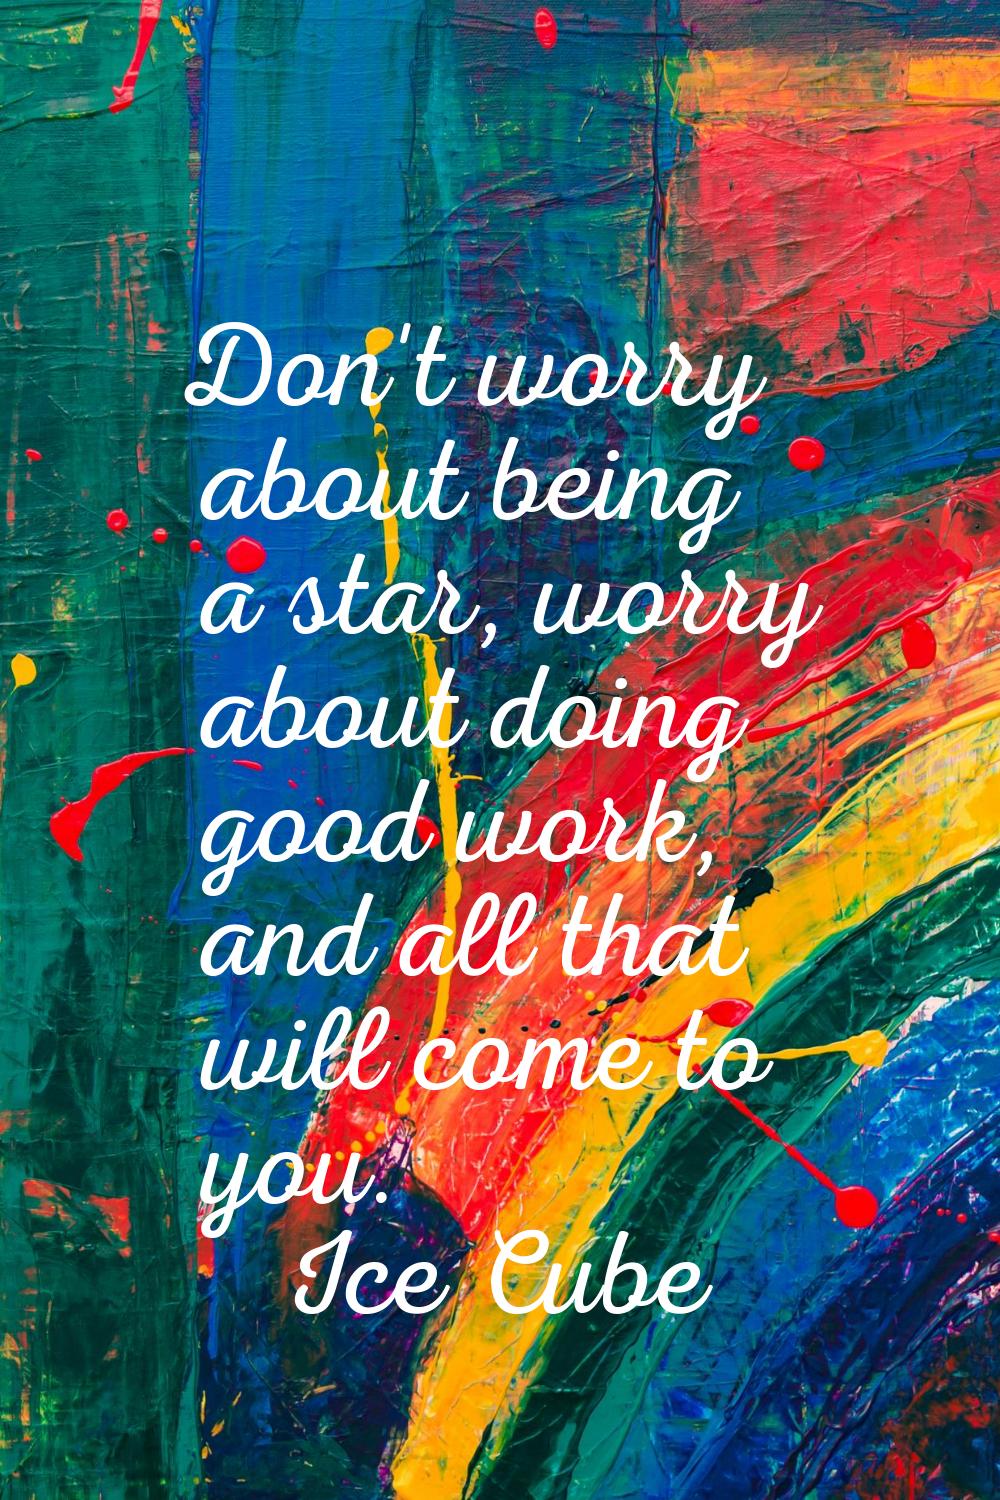 Don't worry about being a star, worry about doing good work, and all that will come to you.